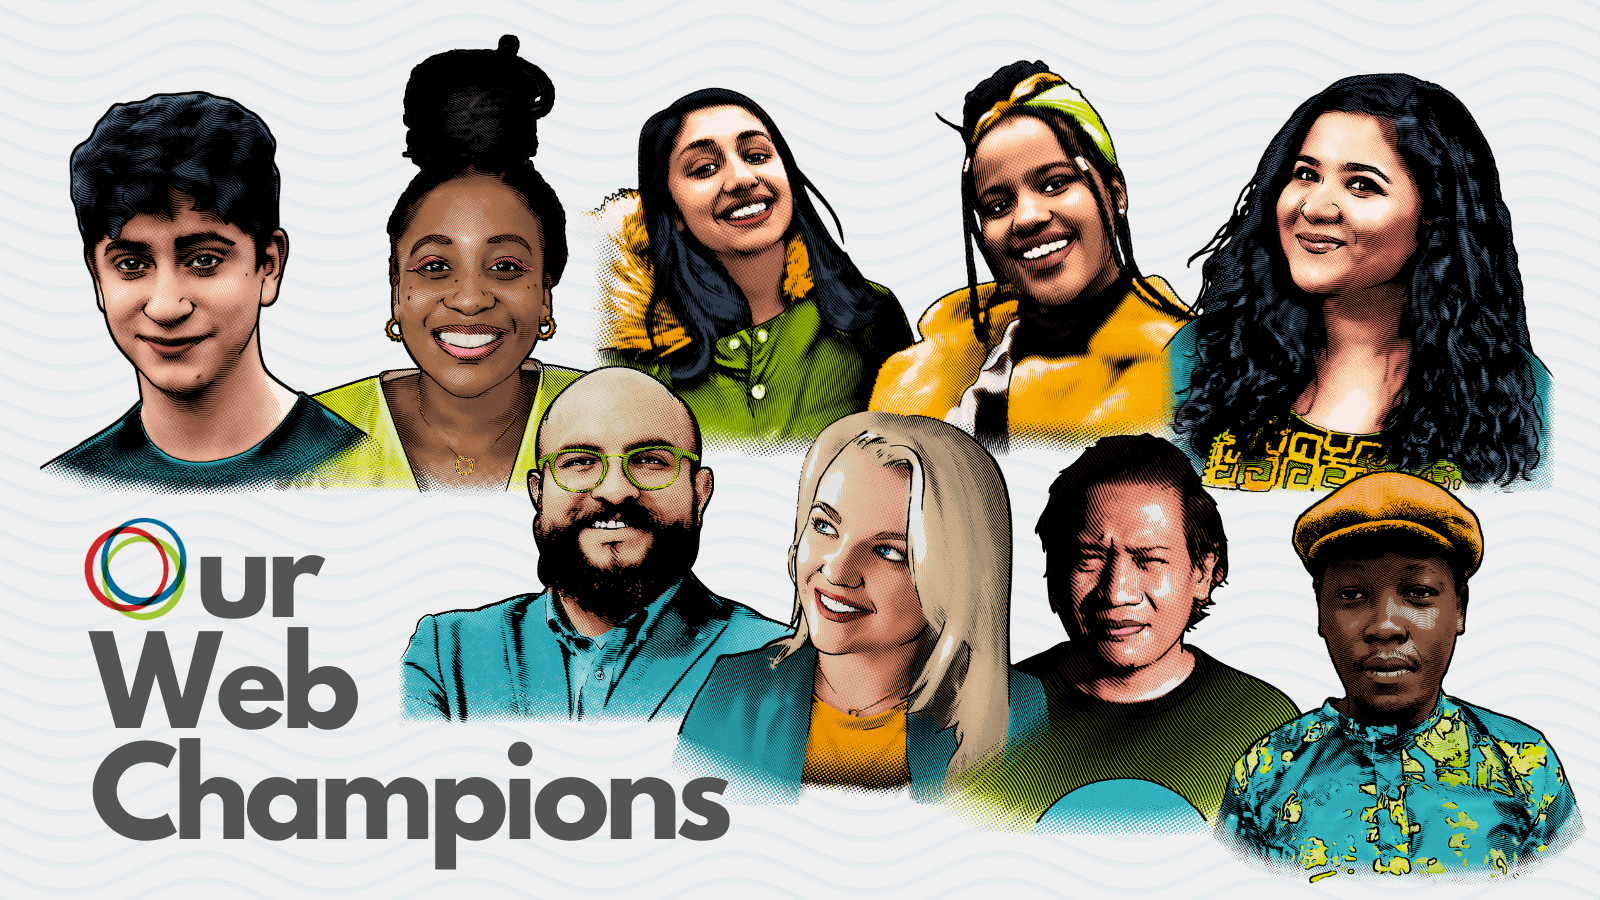 Our Web Champions